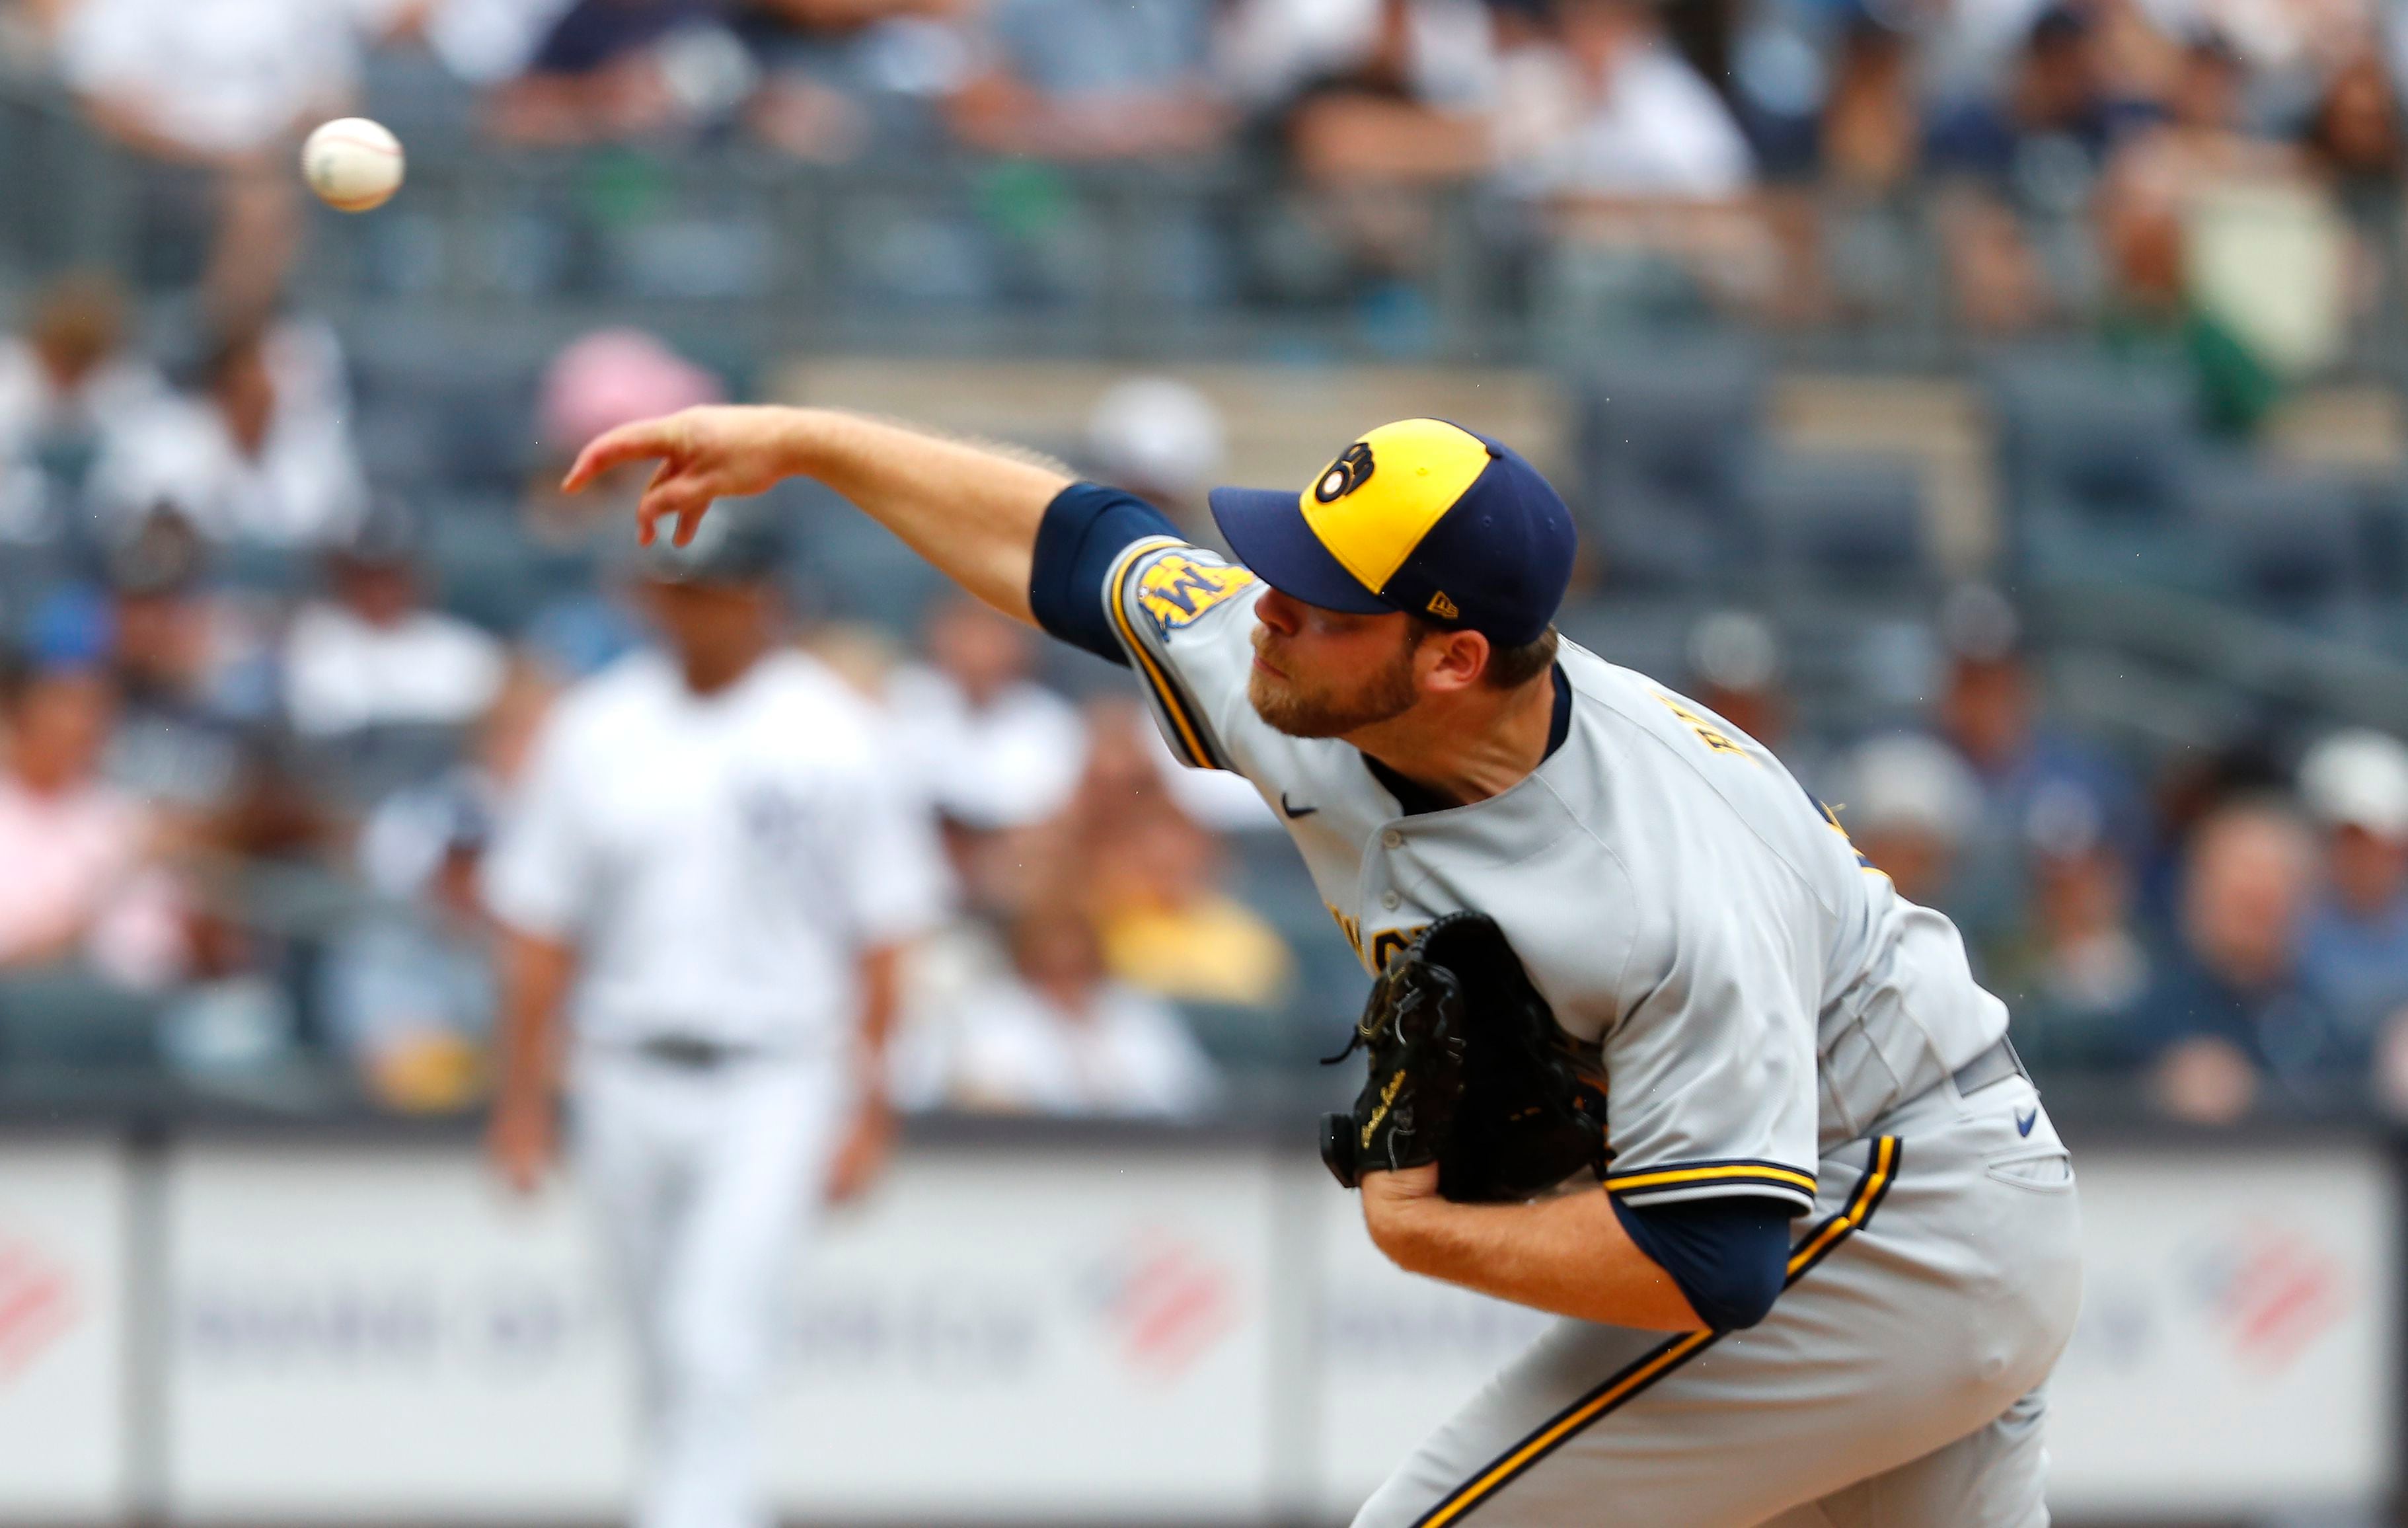 Frelick leaping catch preserves no-hit bid in 10th, Yankees and Brewers  tied 0-0